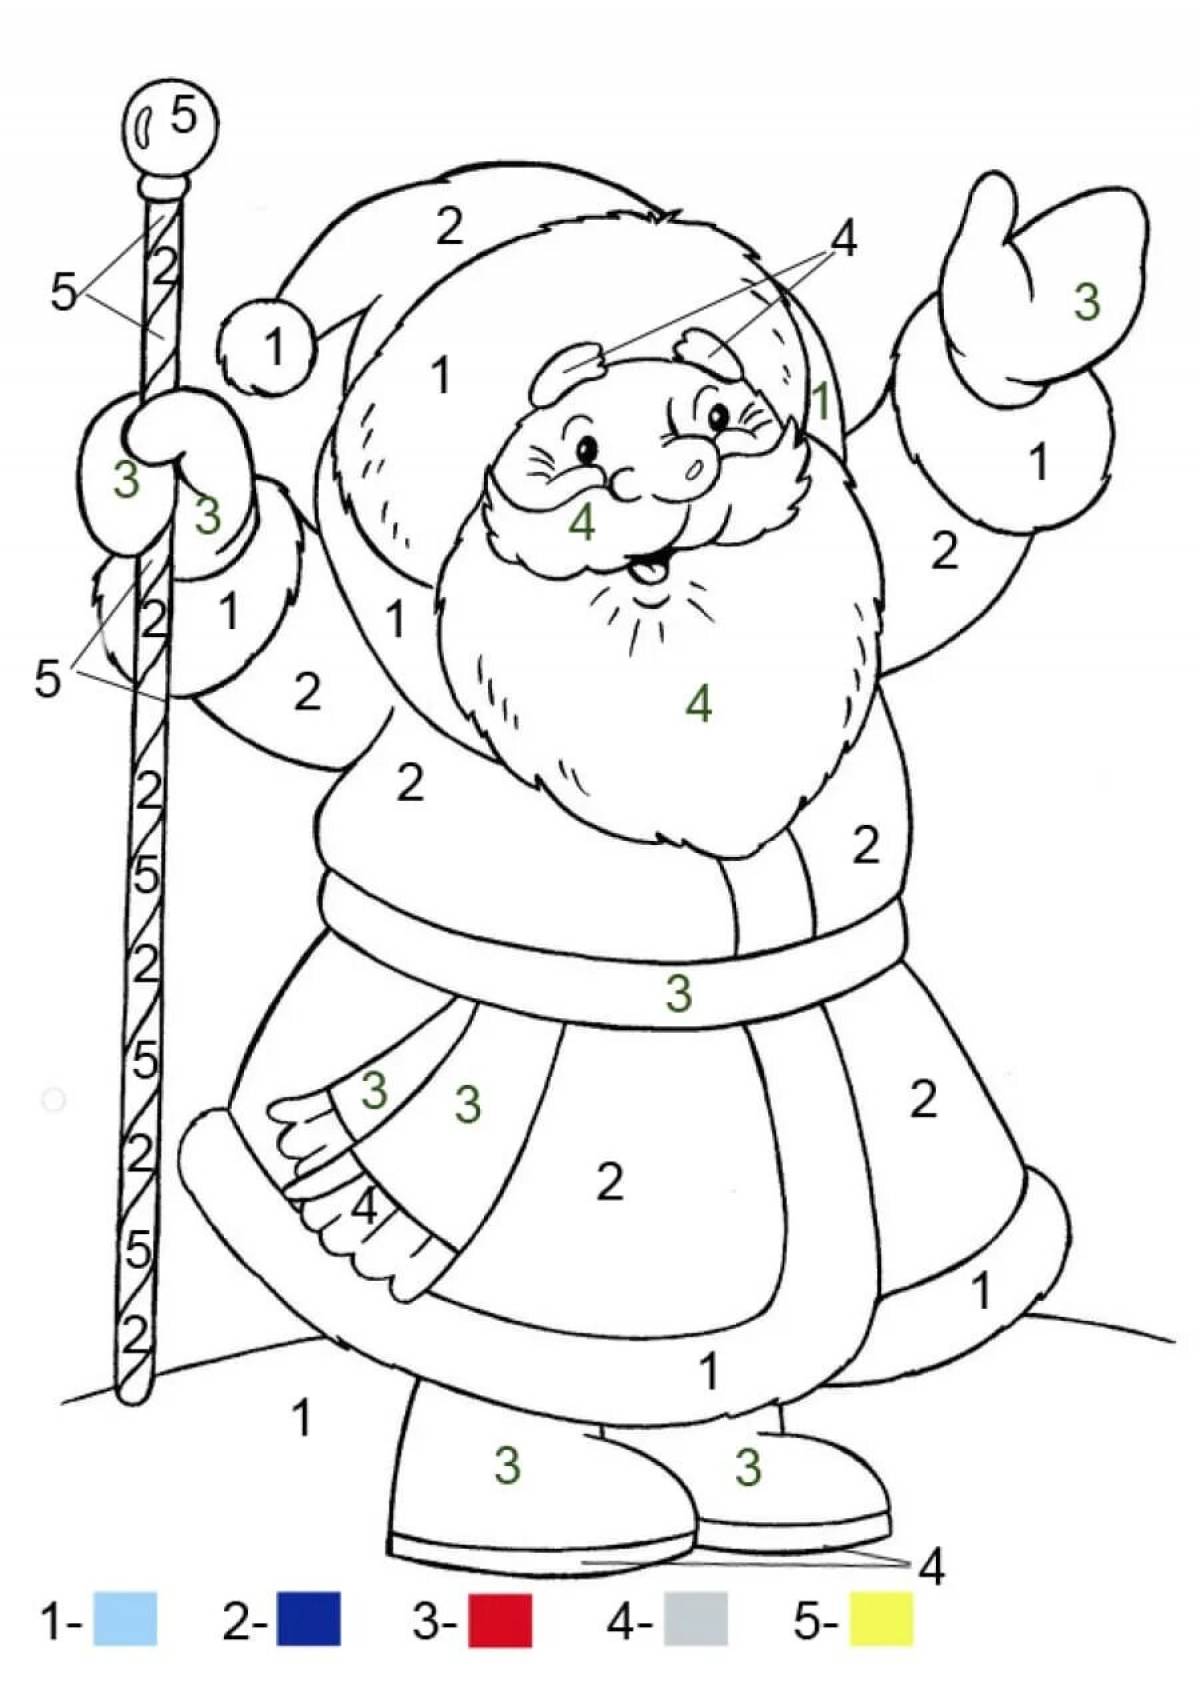 Dazzling Christmas by Numbers coloring book for kids